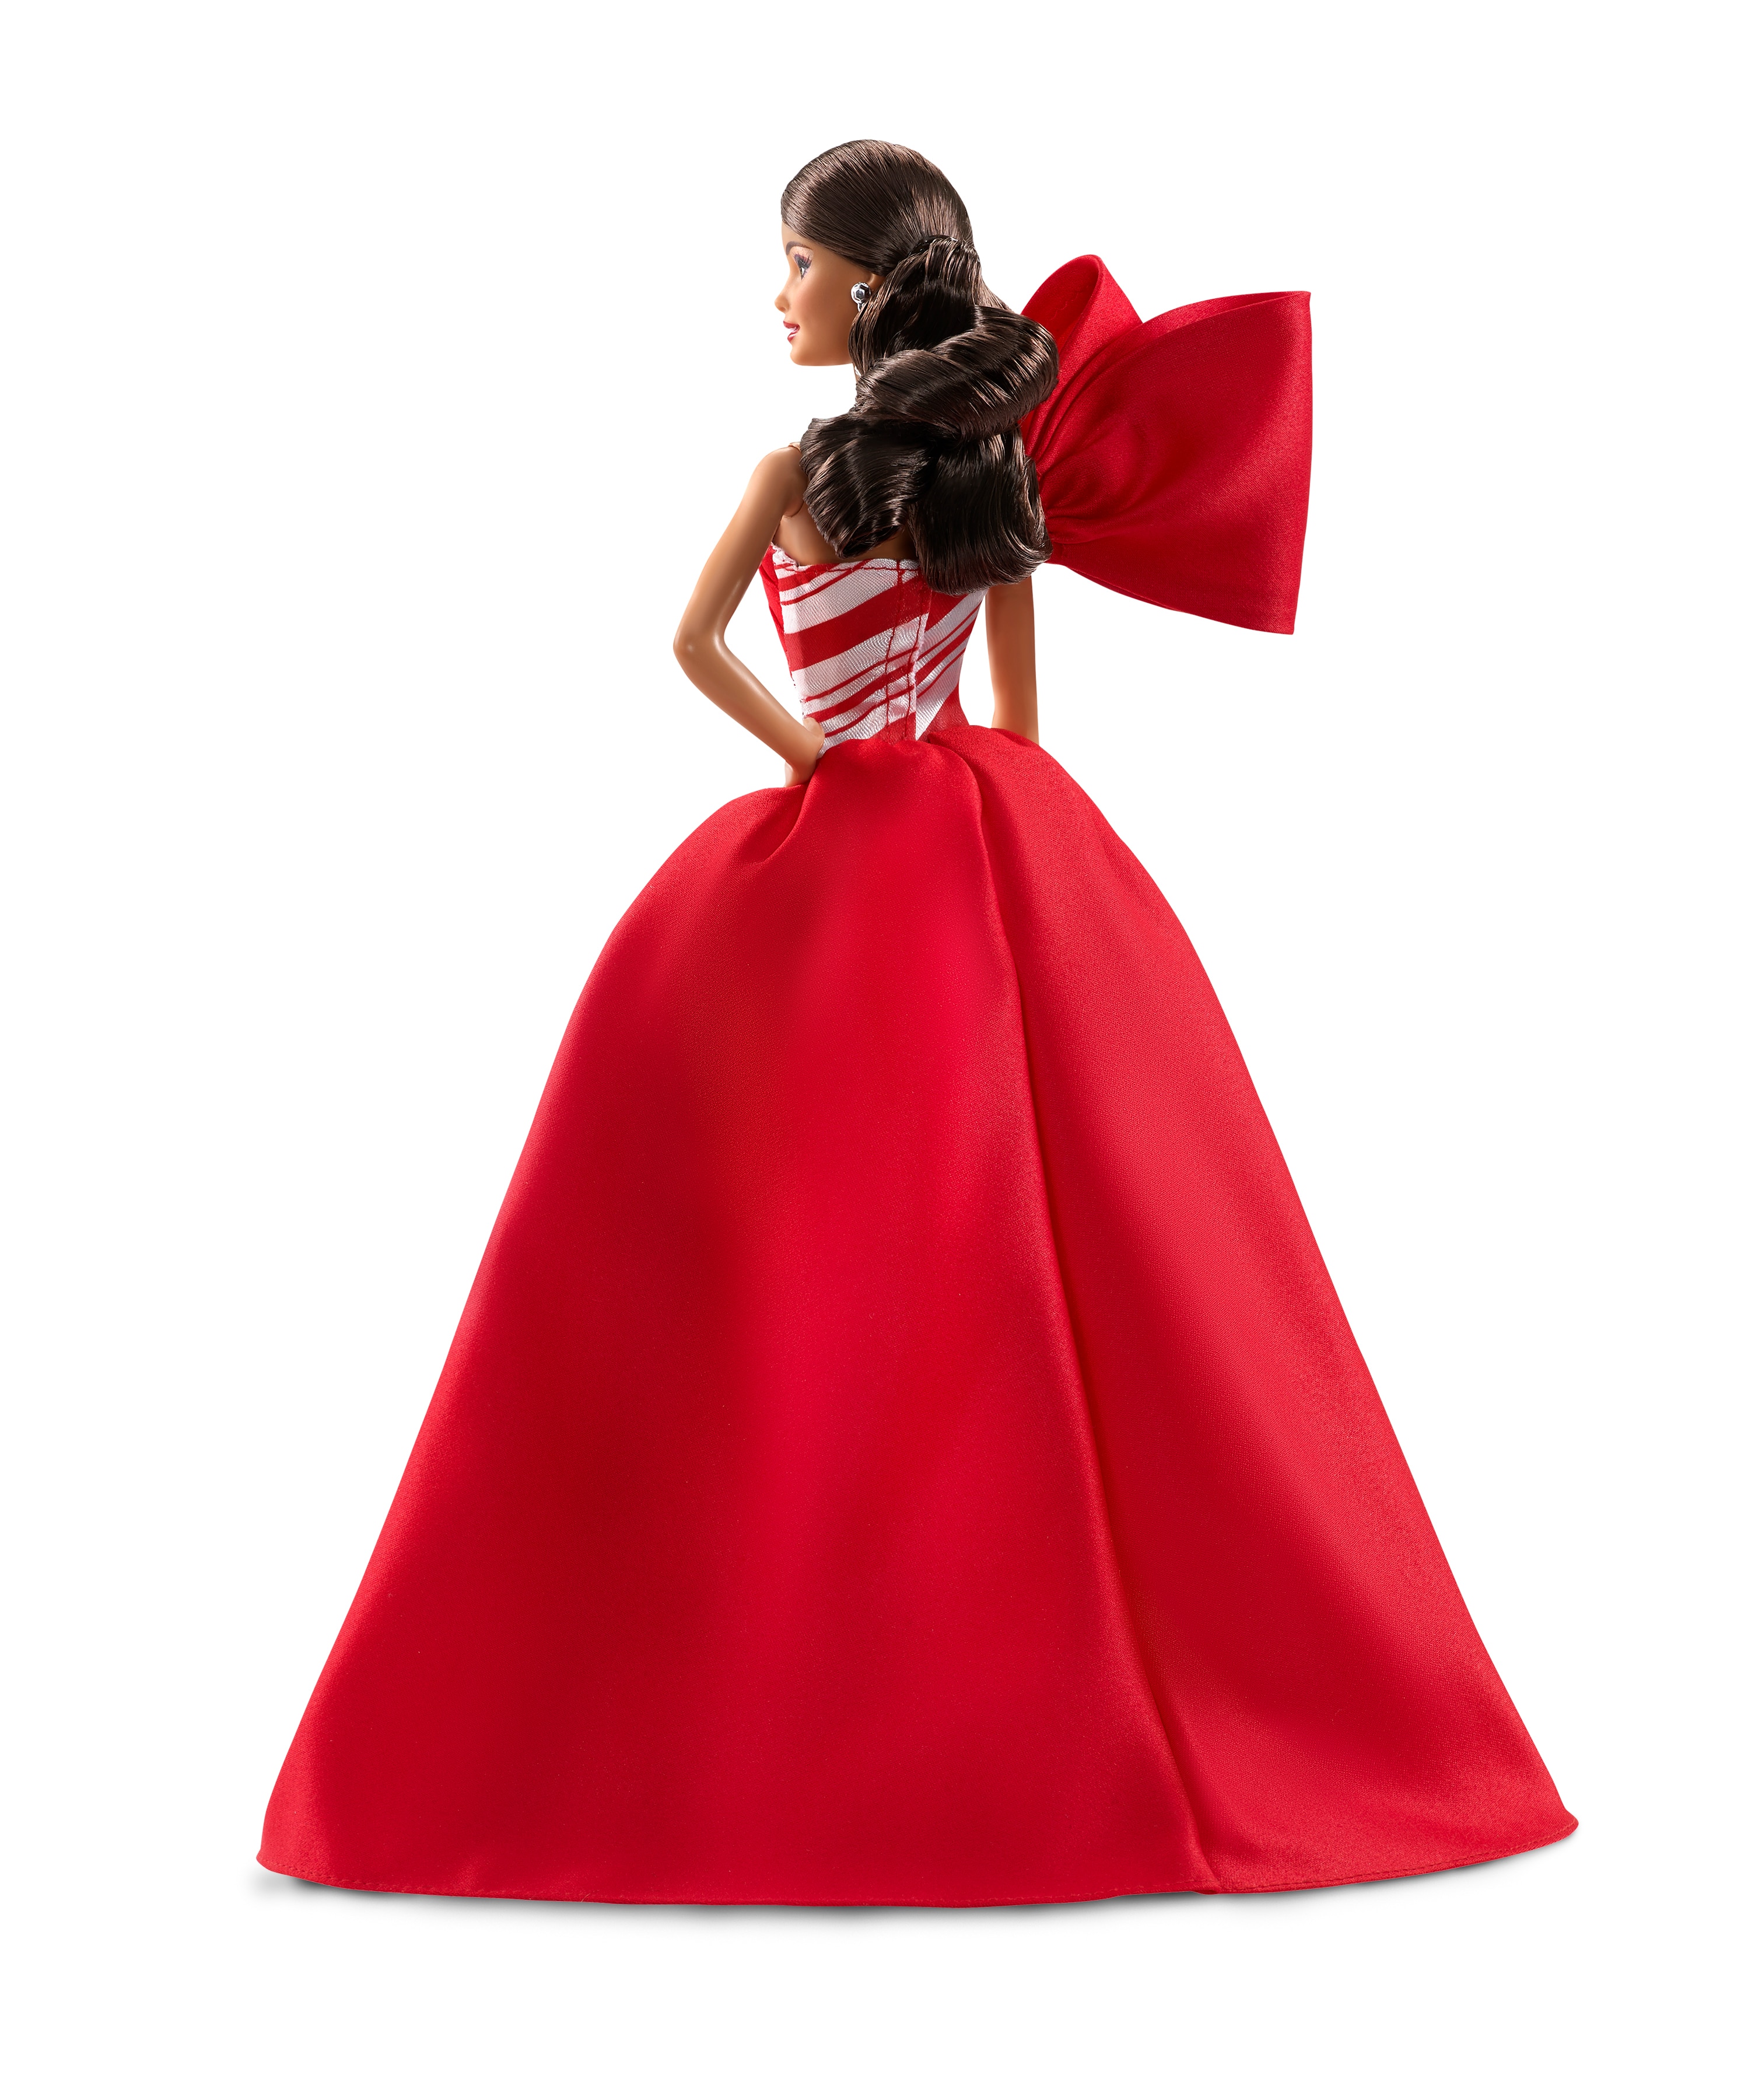 2019 barbie holiday doll